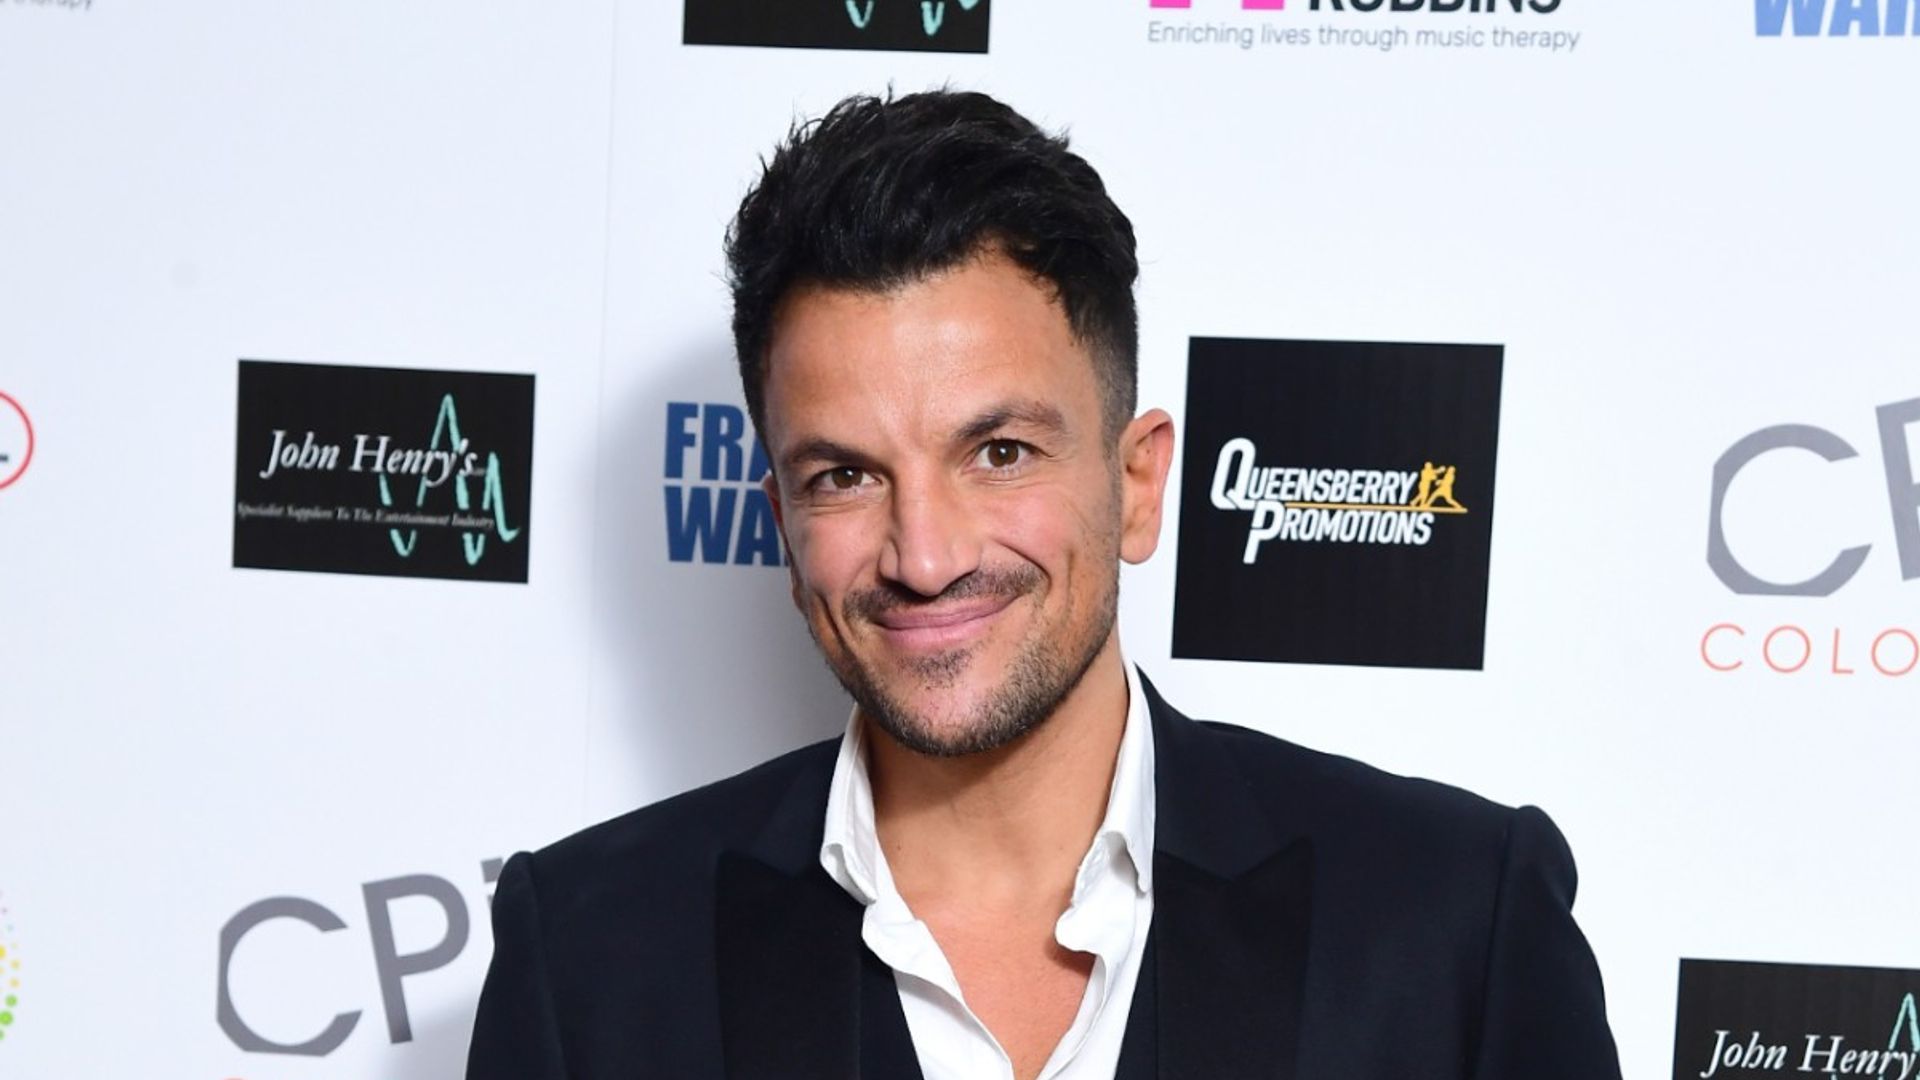 Peter Andre shares rare photo of his children at Christmas | HELLO!